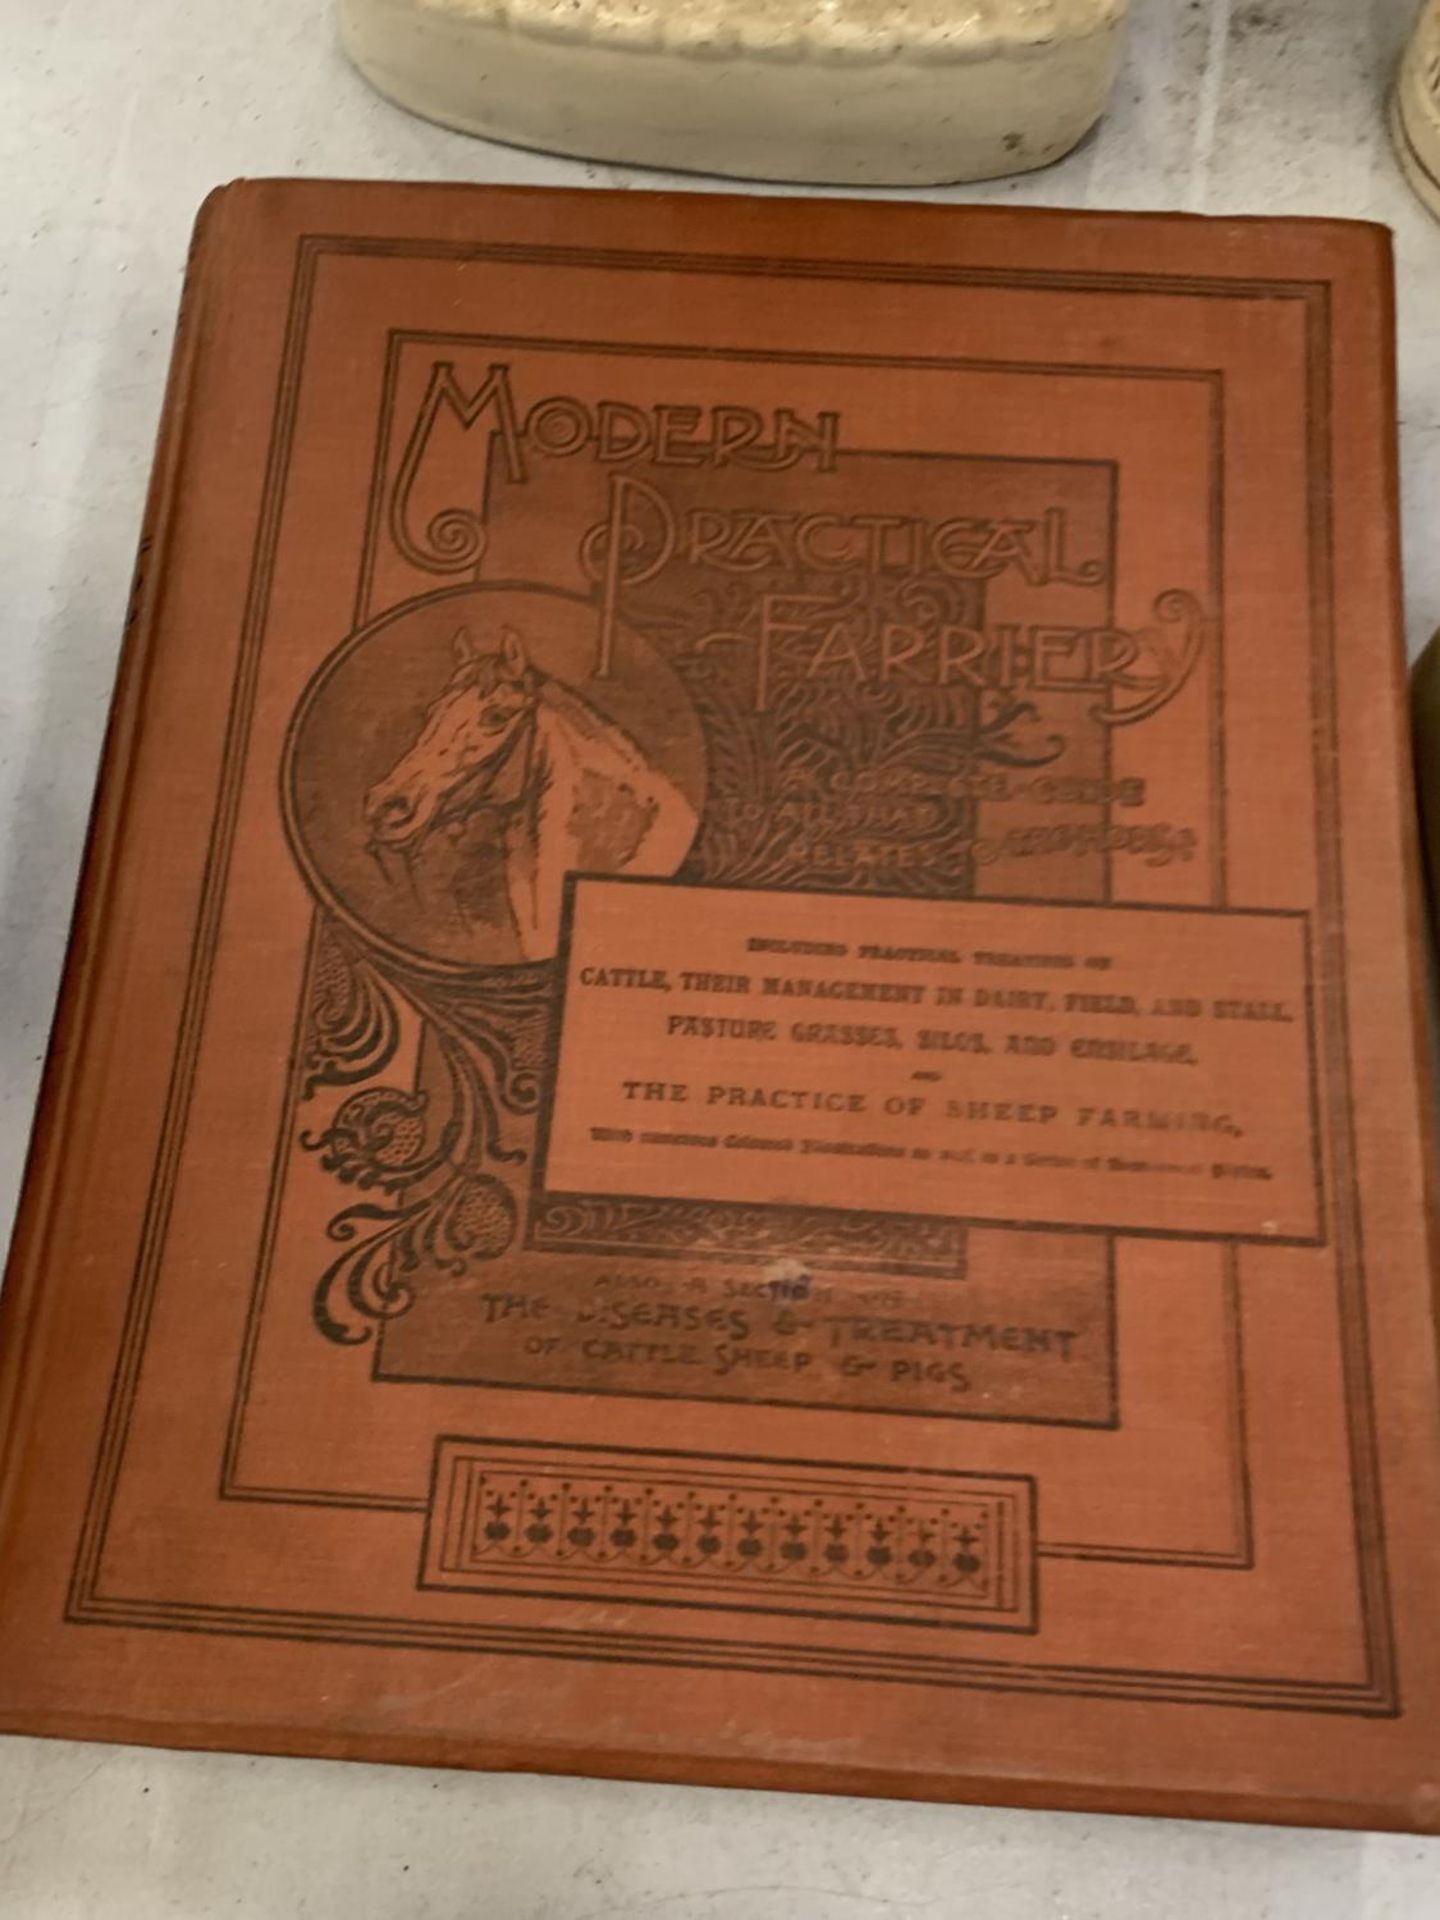 A VINTAGE BOOK TITLED 'MODERN PRACTICAL FARRIERY, A COMPLETE GUIDE TO ALL THAT RELATES TO THE HORSE'